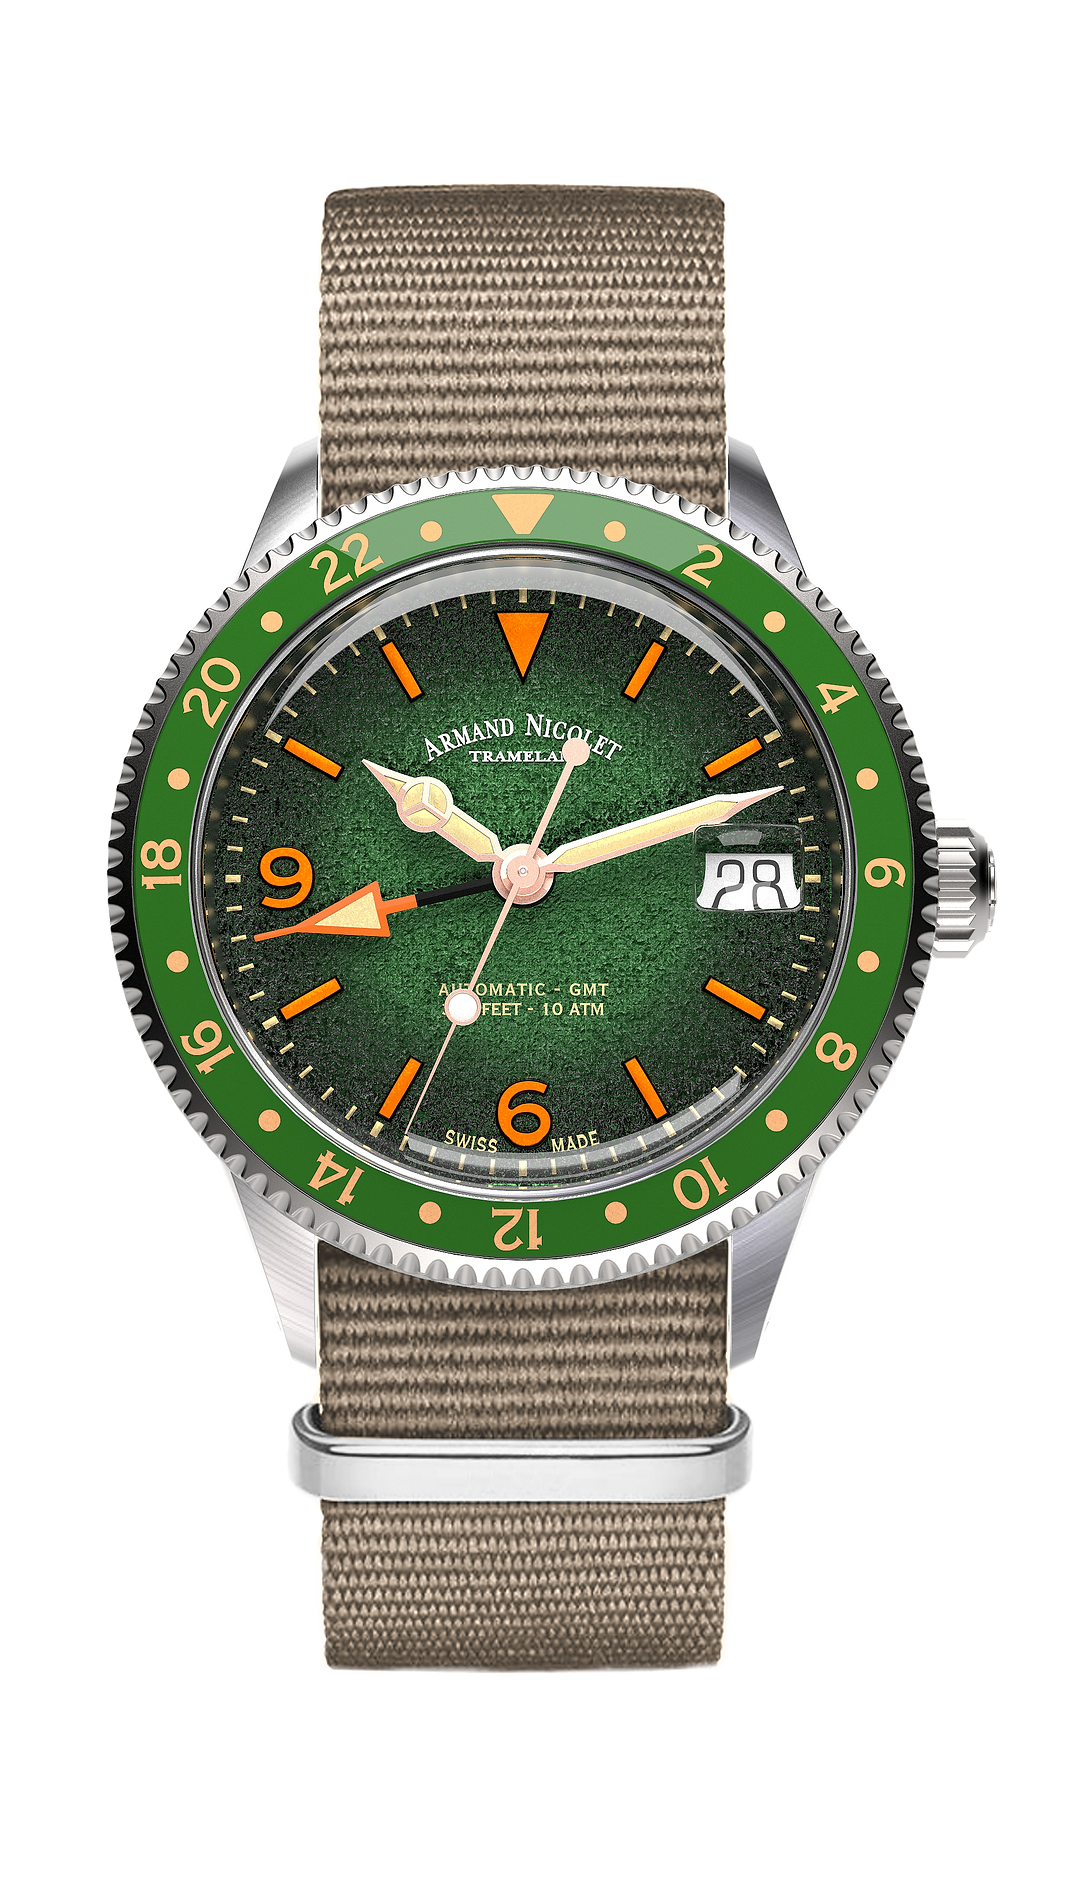 Armand Nicolet Men's Watch VS1 GMT 38mm Green A506AVAA-VS-BN19500AAGG